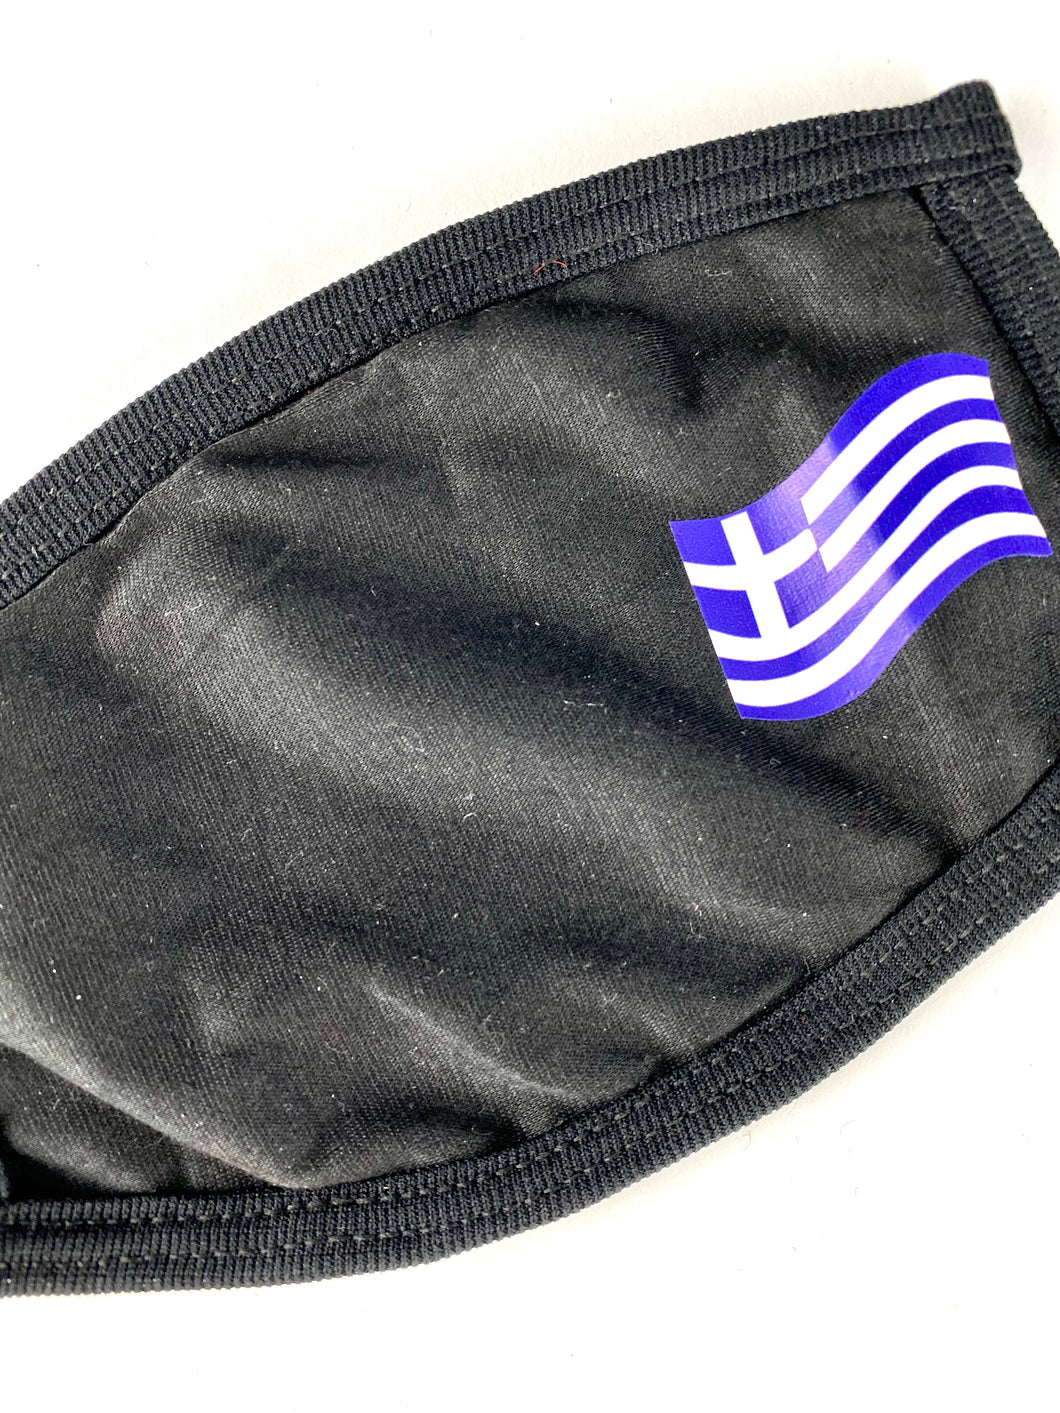 Greece Flag Print Mask with Cotton Lining